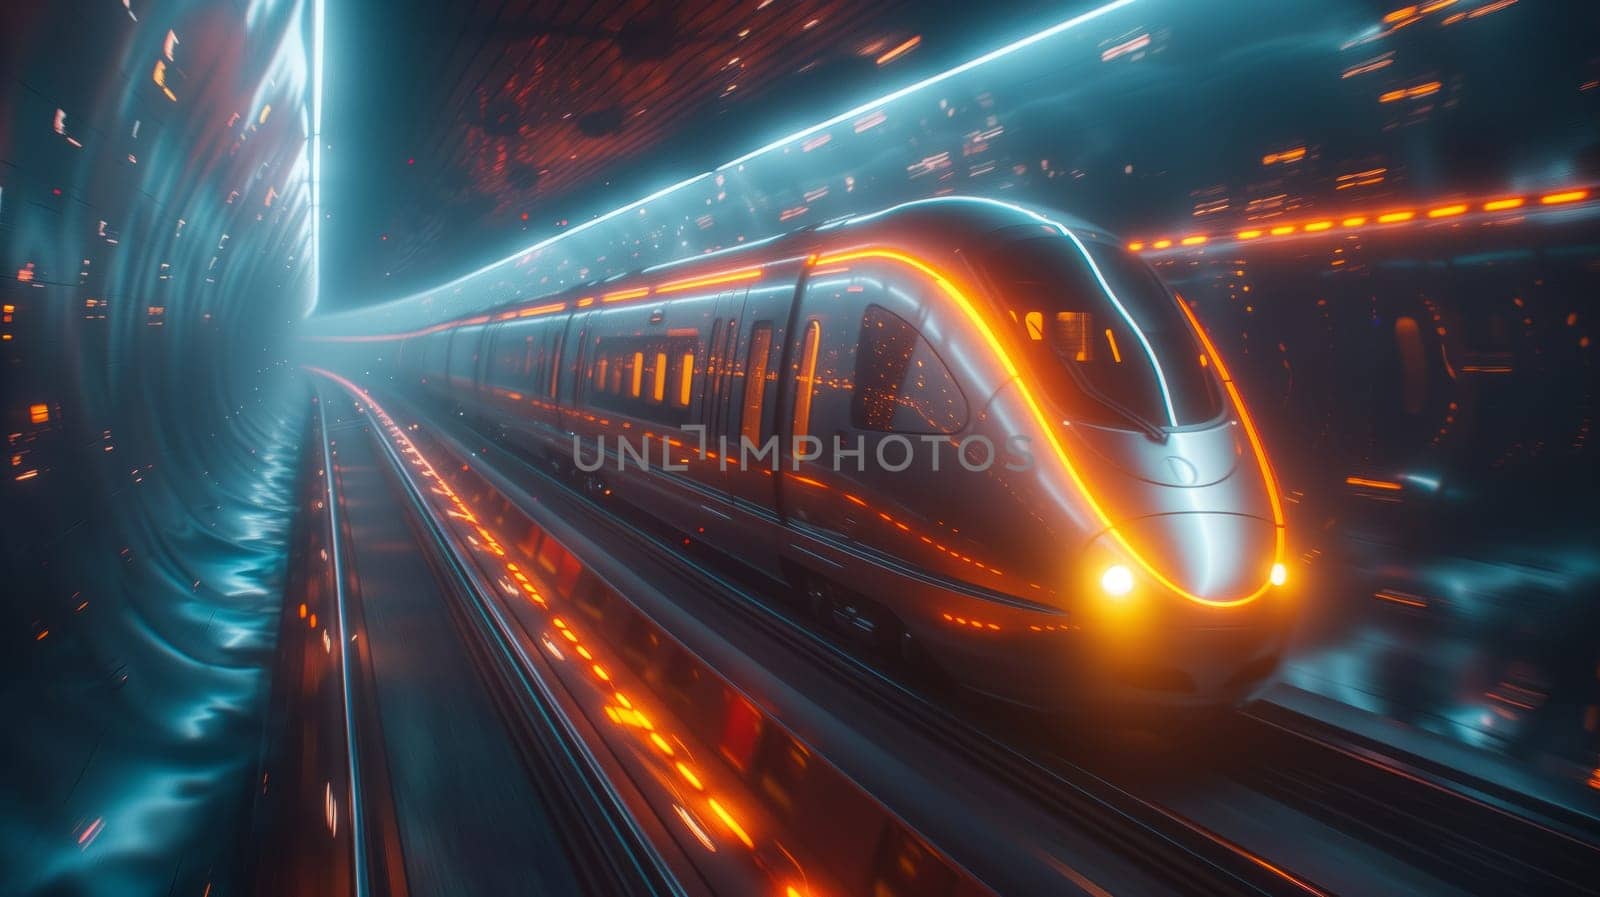 Electric blue train with automotive lighting passing through tunnel at night by richwolf